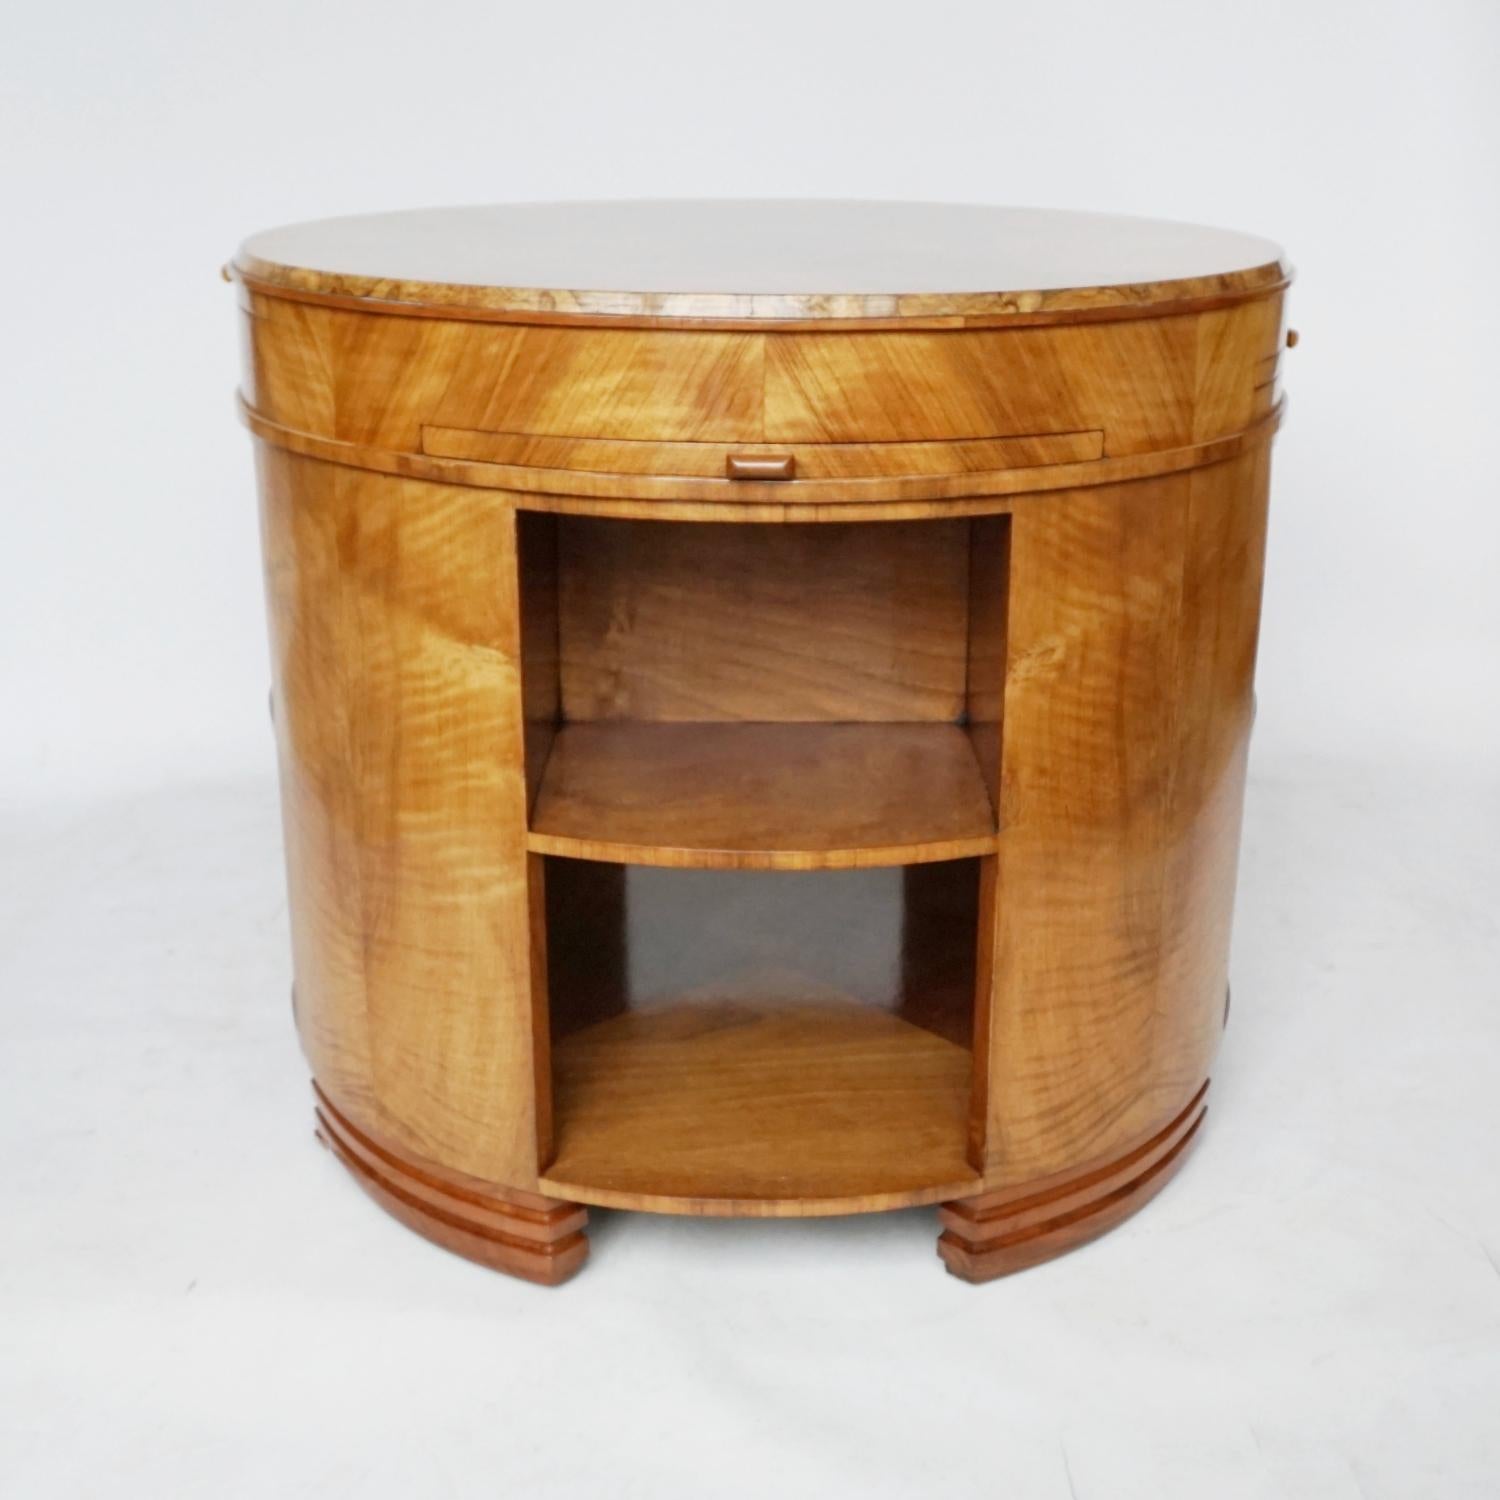 Art Deco Library Table by Heal's of London Circa 1935 English 6